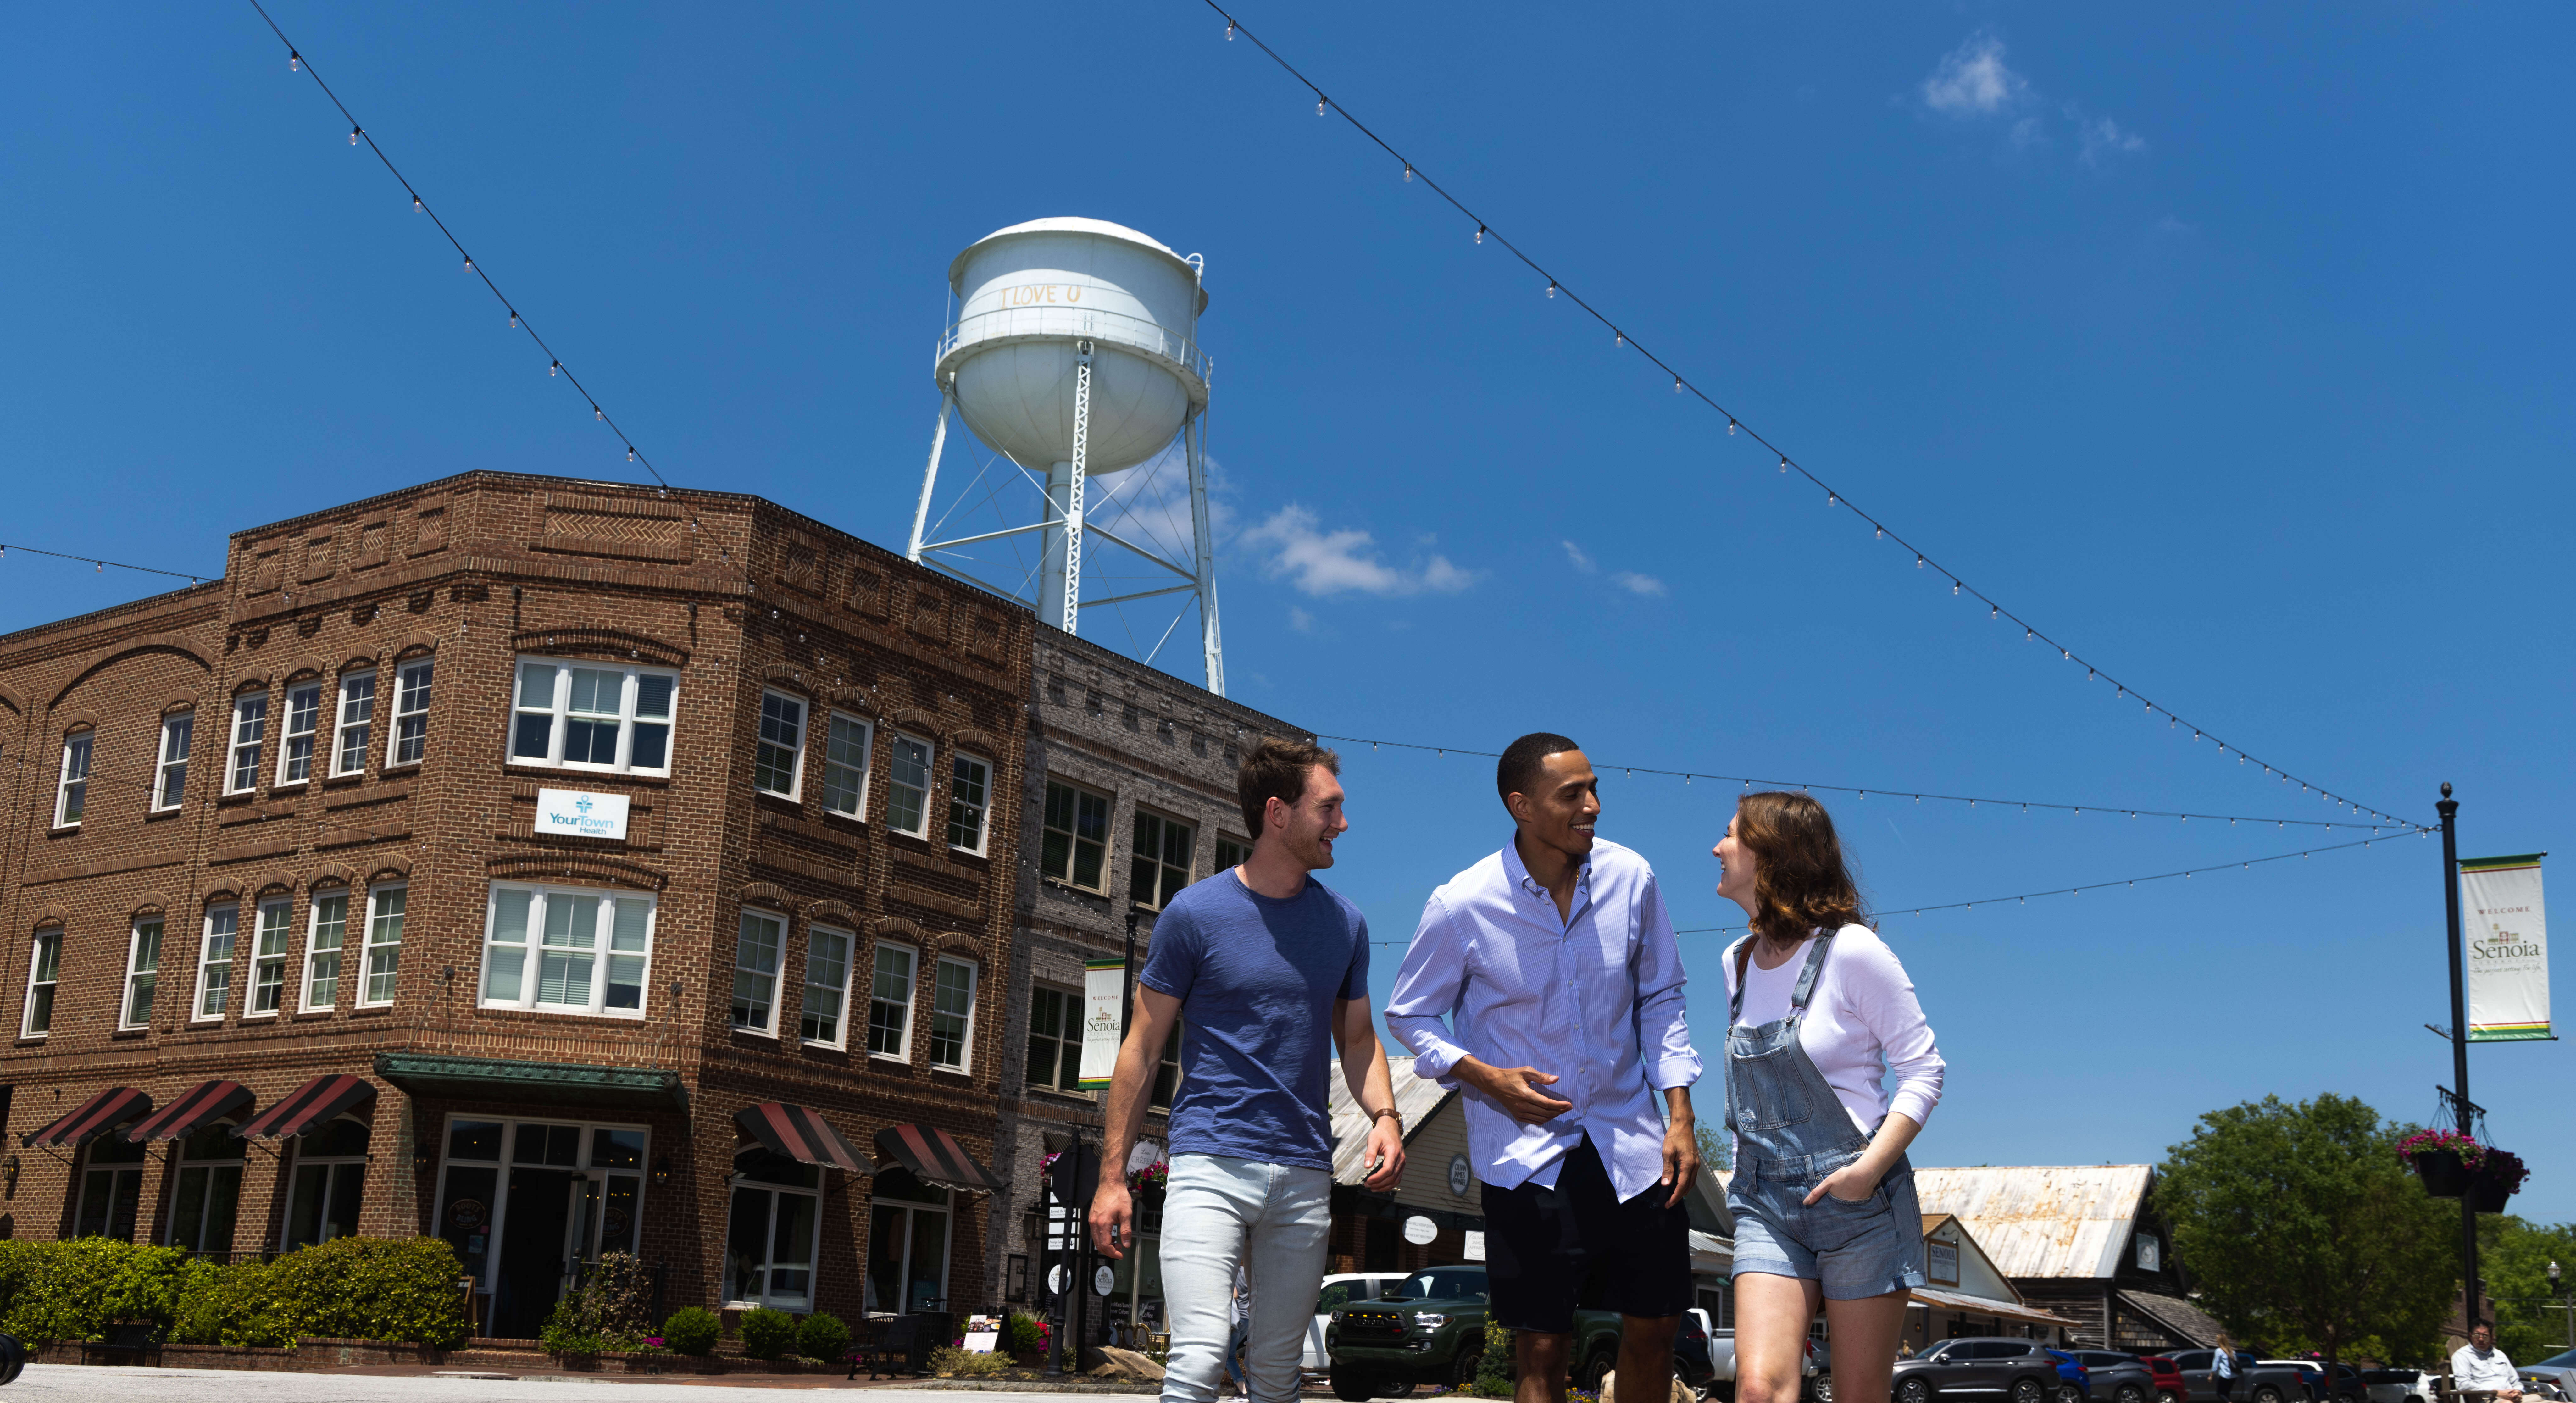 Three friends exploring downtown Senoia with famous watertower in background